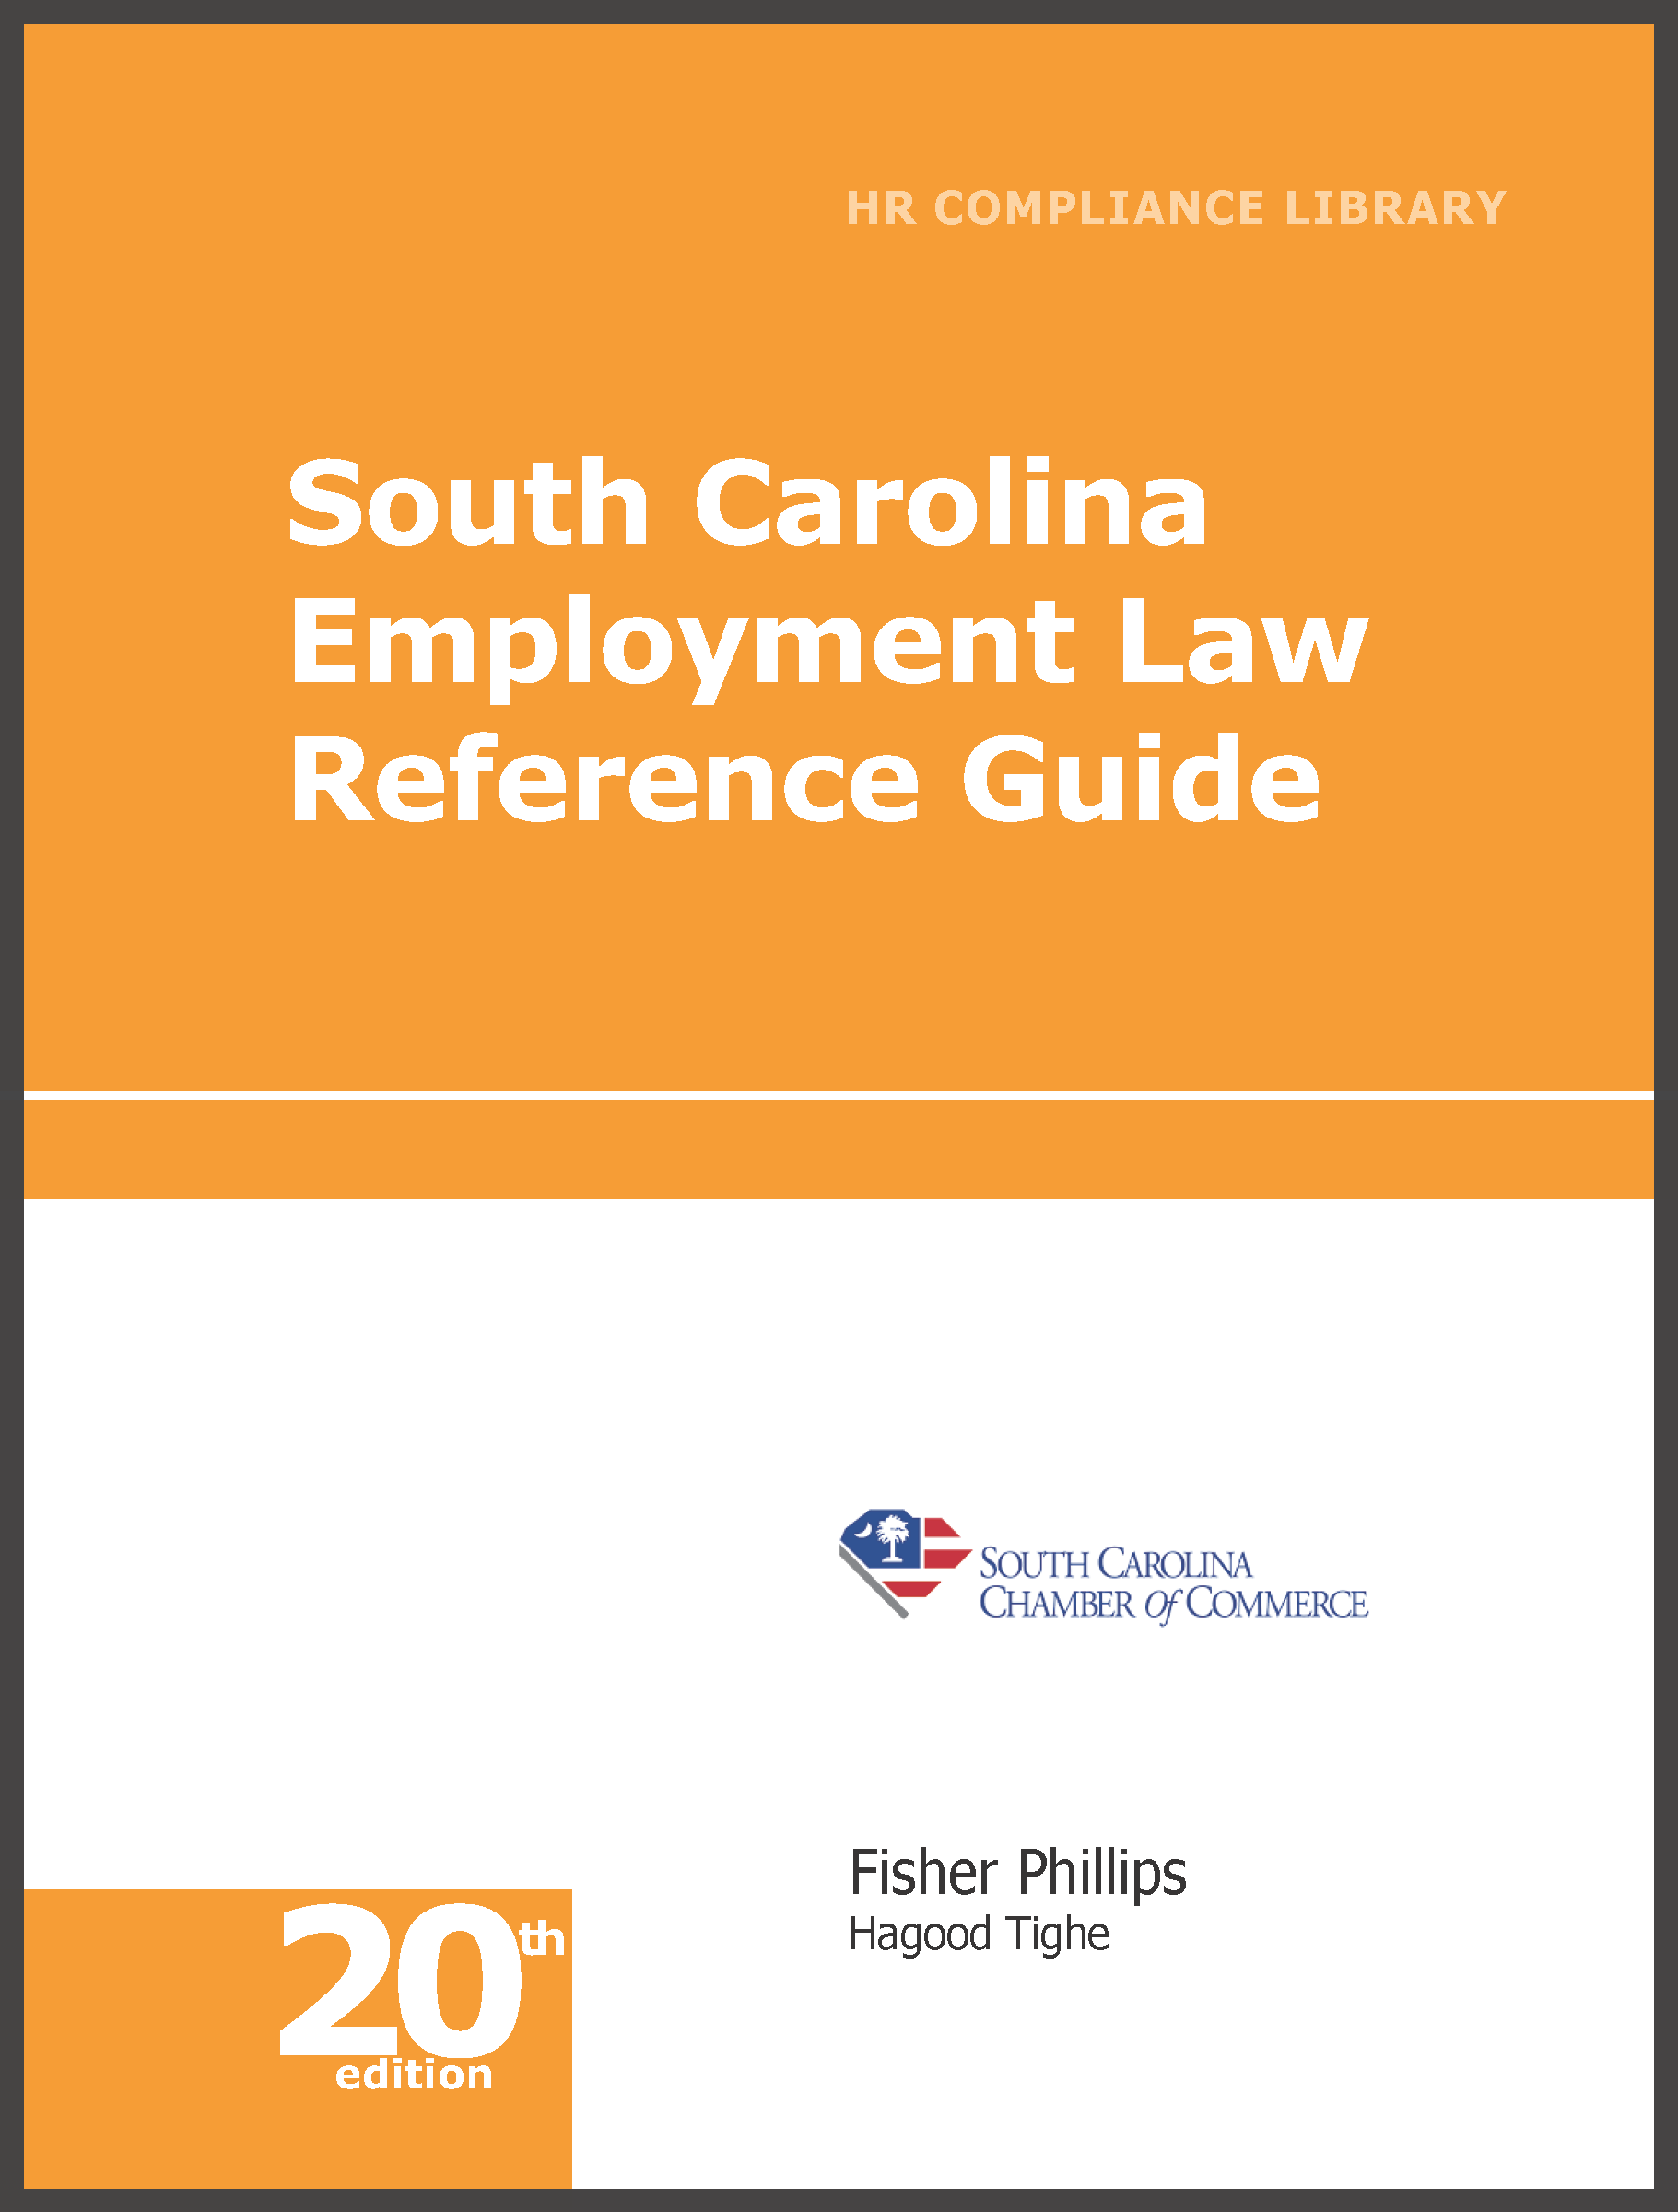 South Carolina Human Resources Library employment law image, remote work, labor laws, employment laws, right to work, order of protection, minimum wage